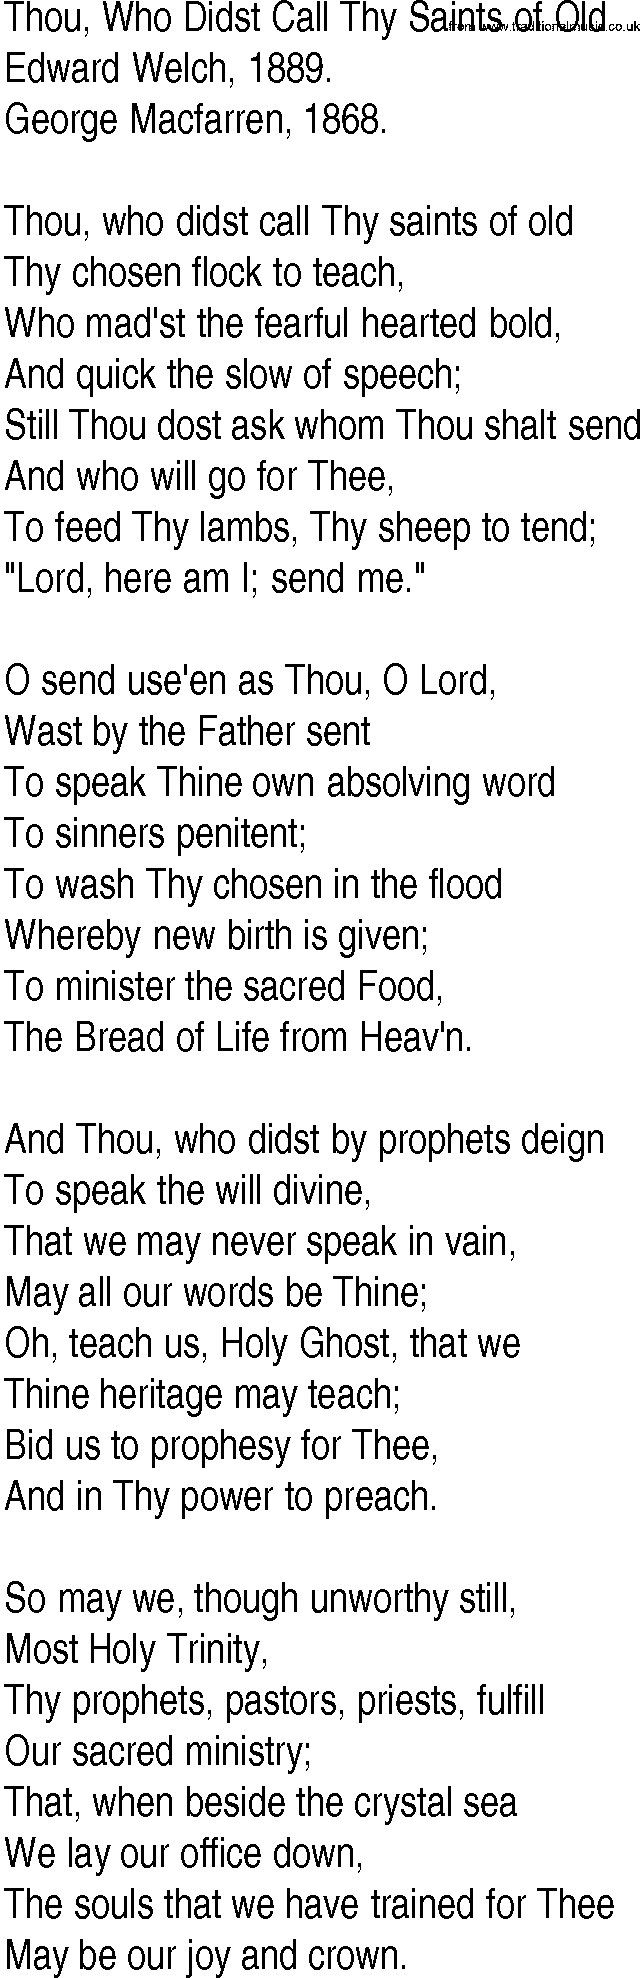 Hymn and Gospel Song: Thou, Who Didst Call Thy Saints of Old by Edward Welch lyrics